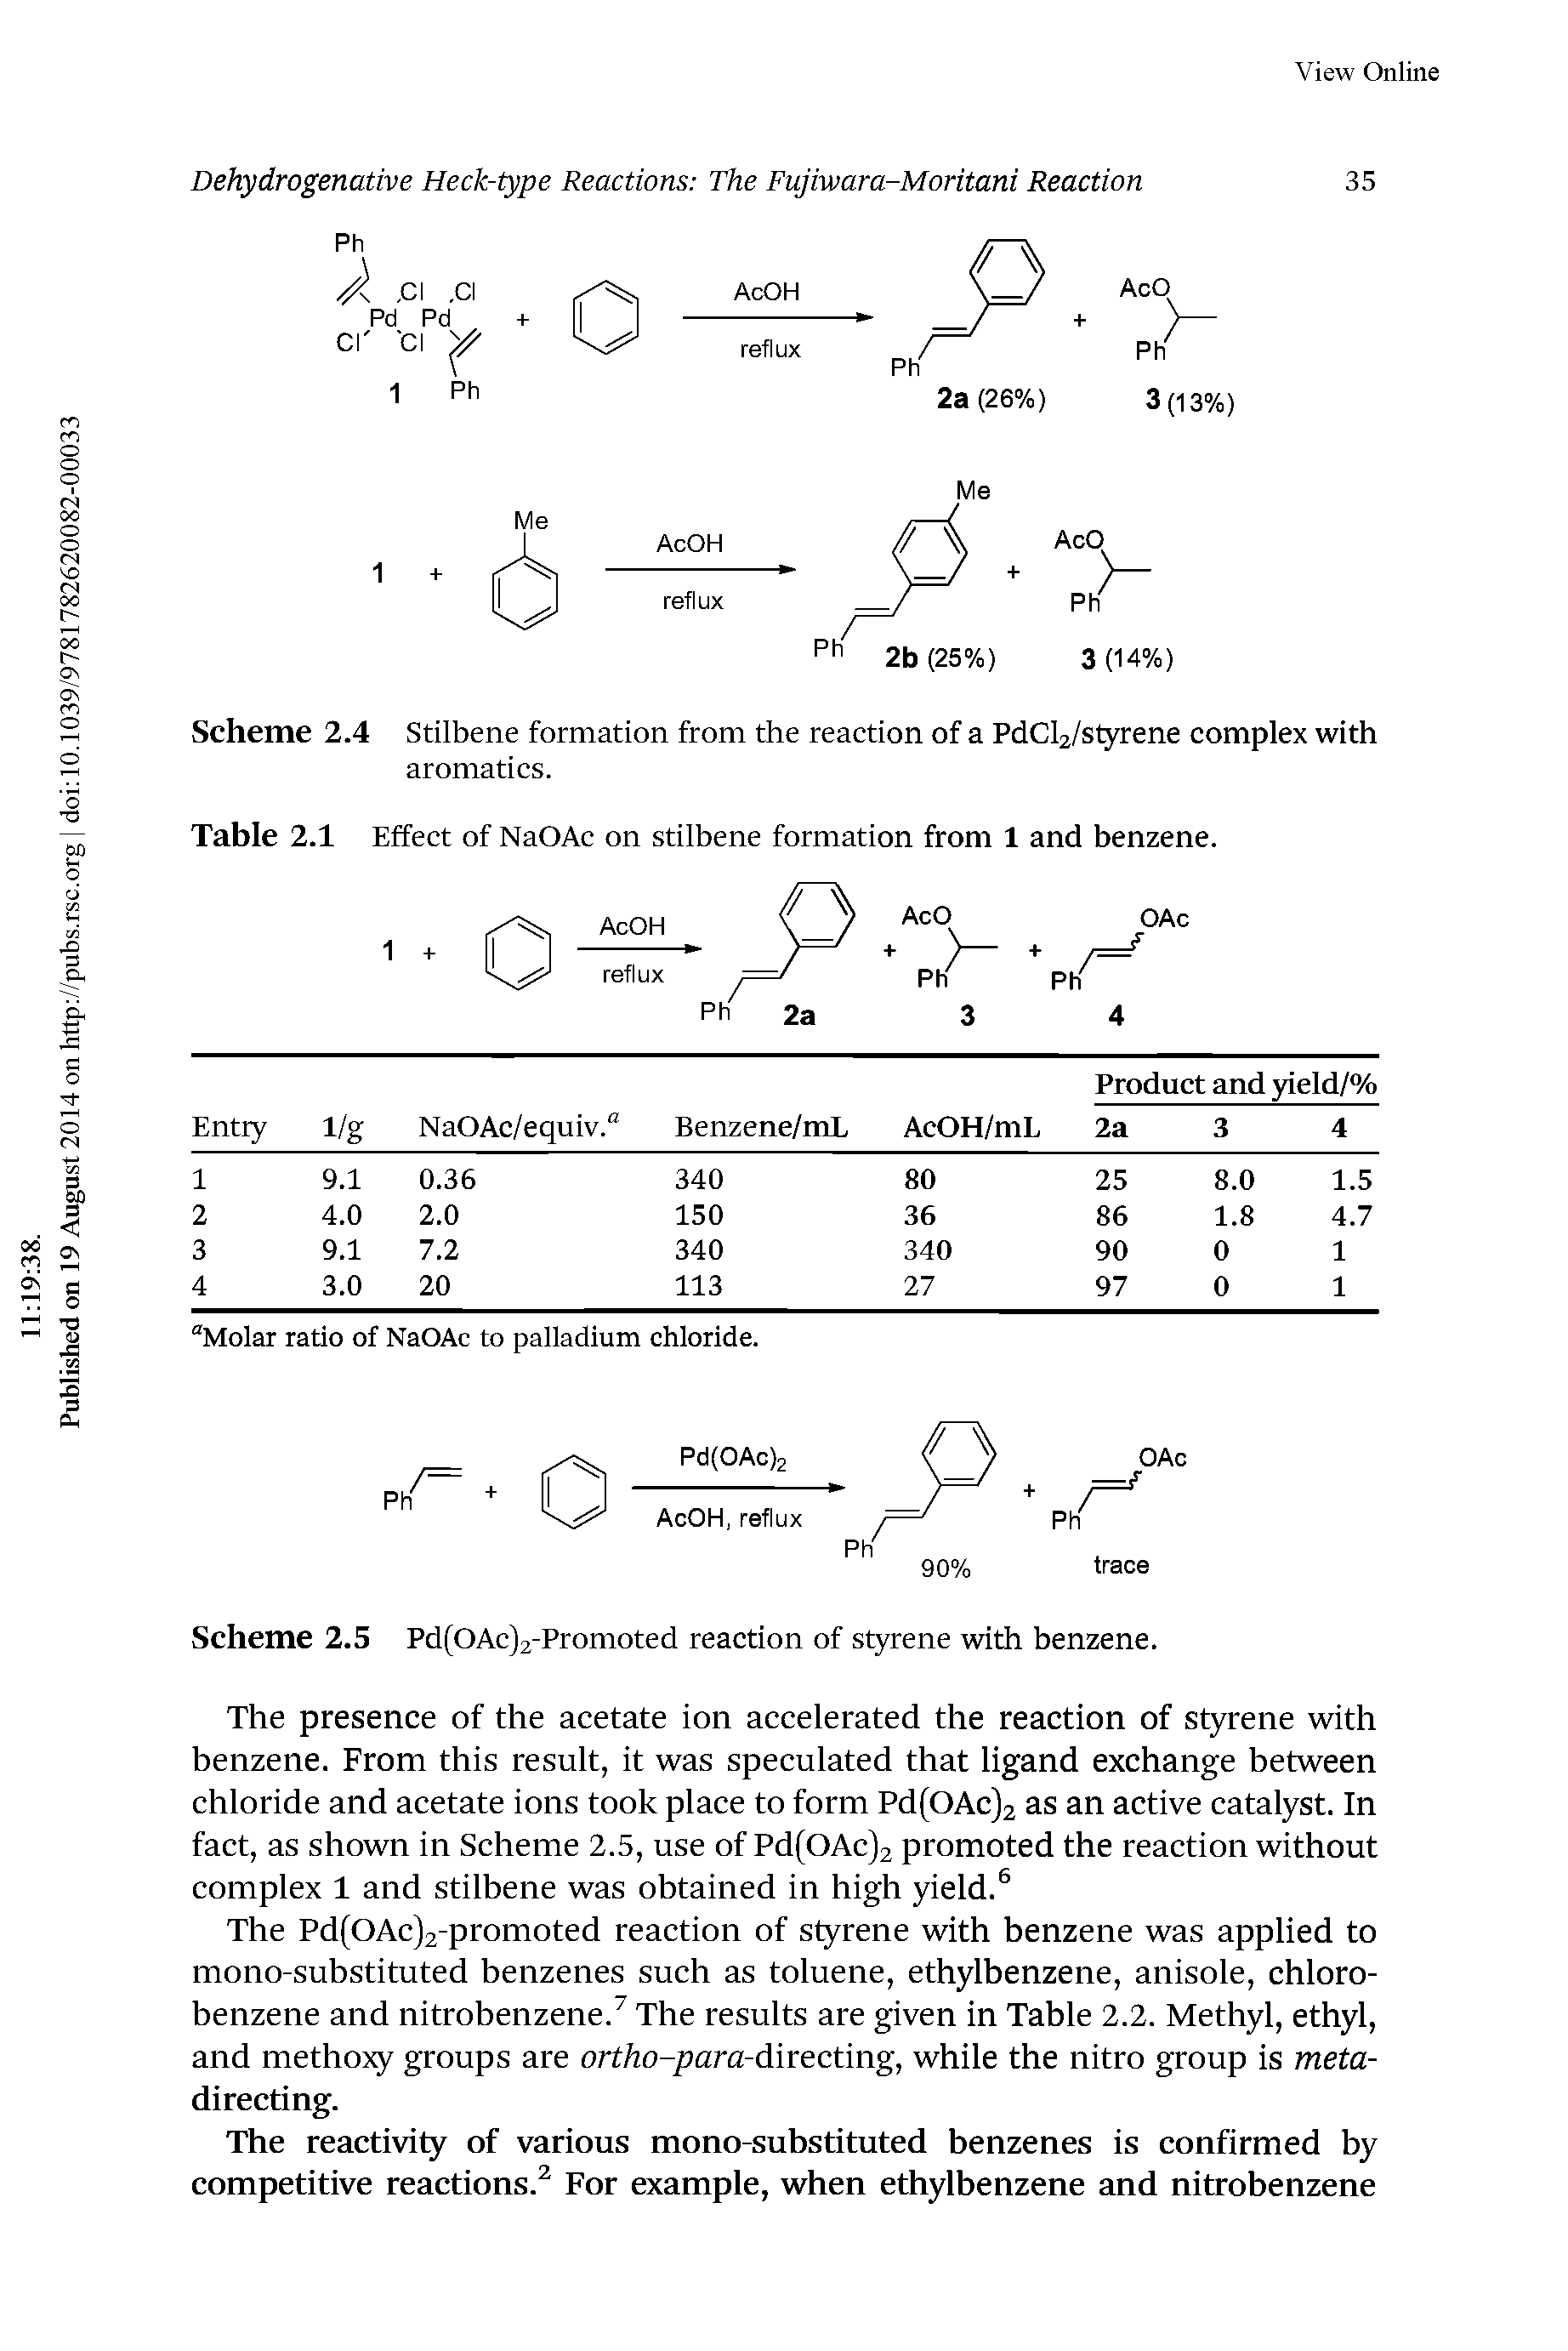 Table 2.1 Effect of NaOAc on stilbene formation from 1 and benzene.